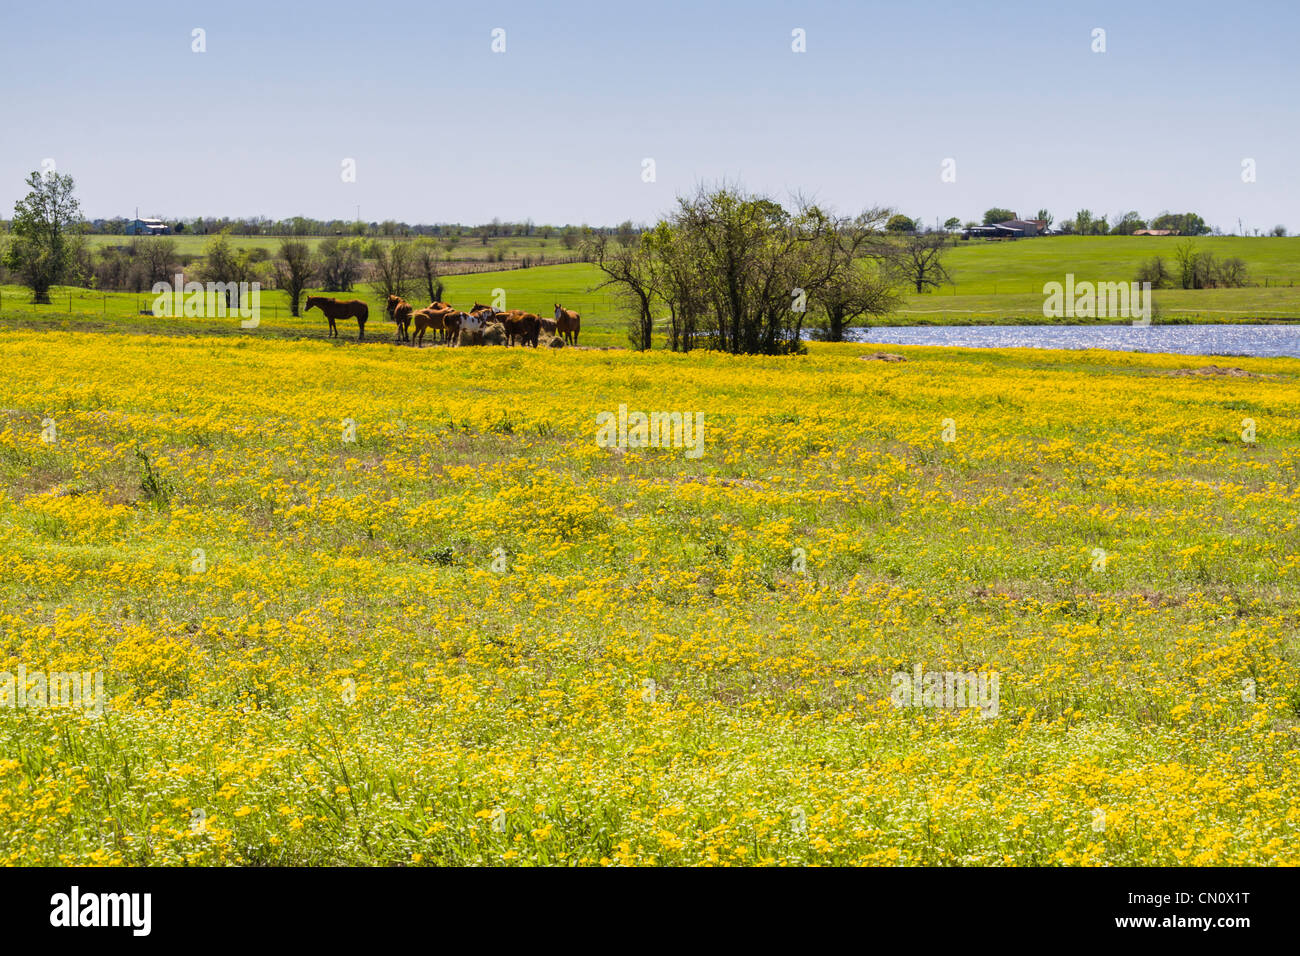 Horses in a field of yellow Coreopsis in bloom on Texas Farm-to-Market Road 362 near Whitehall, Texas. Stock Photo